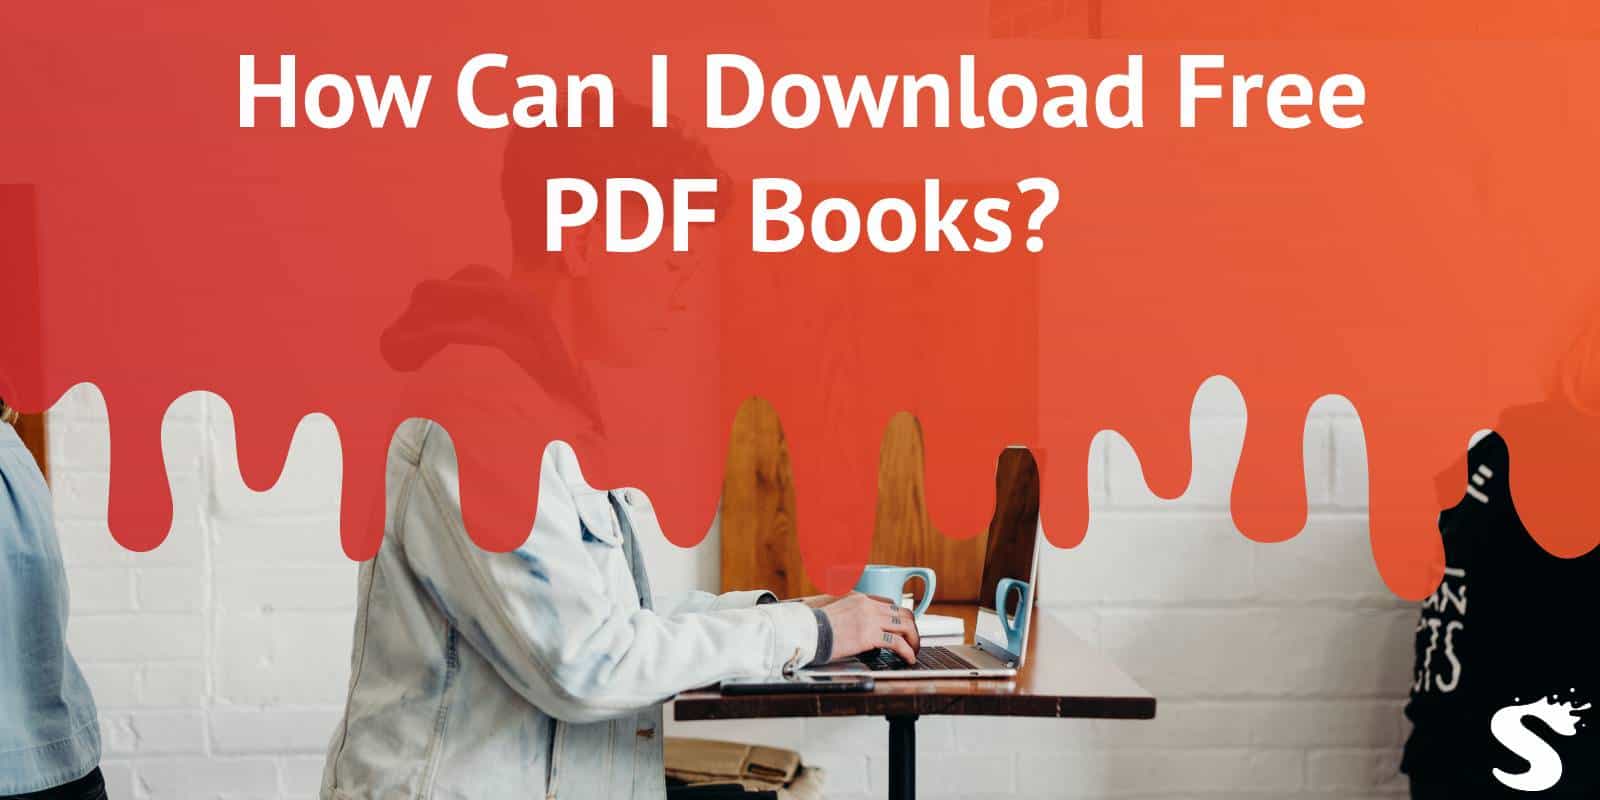 How Can I Download Free PDF Books?